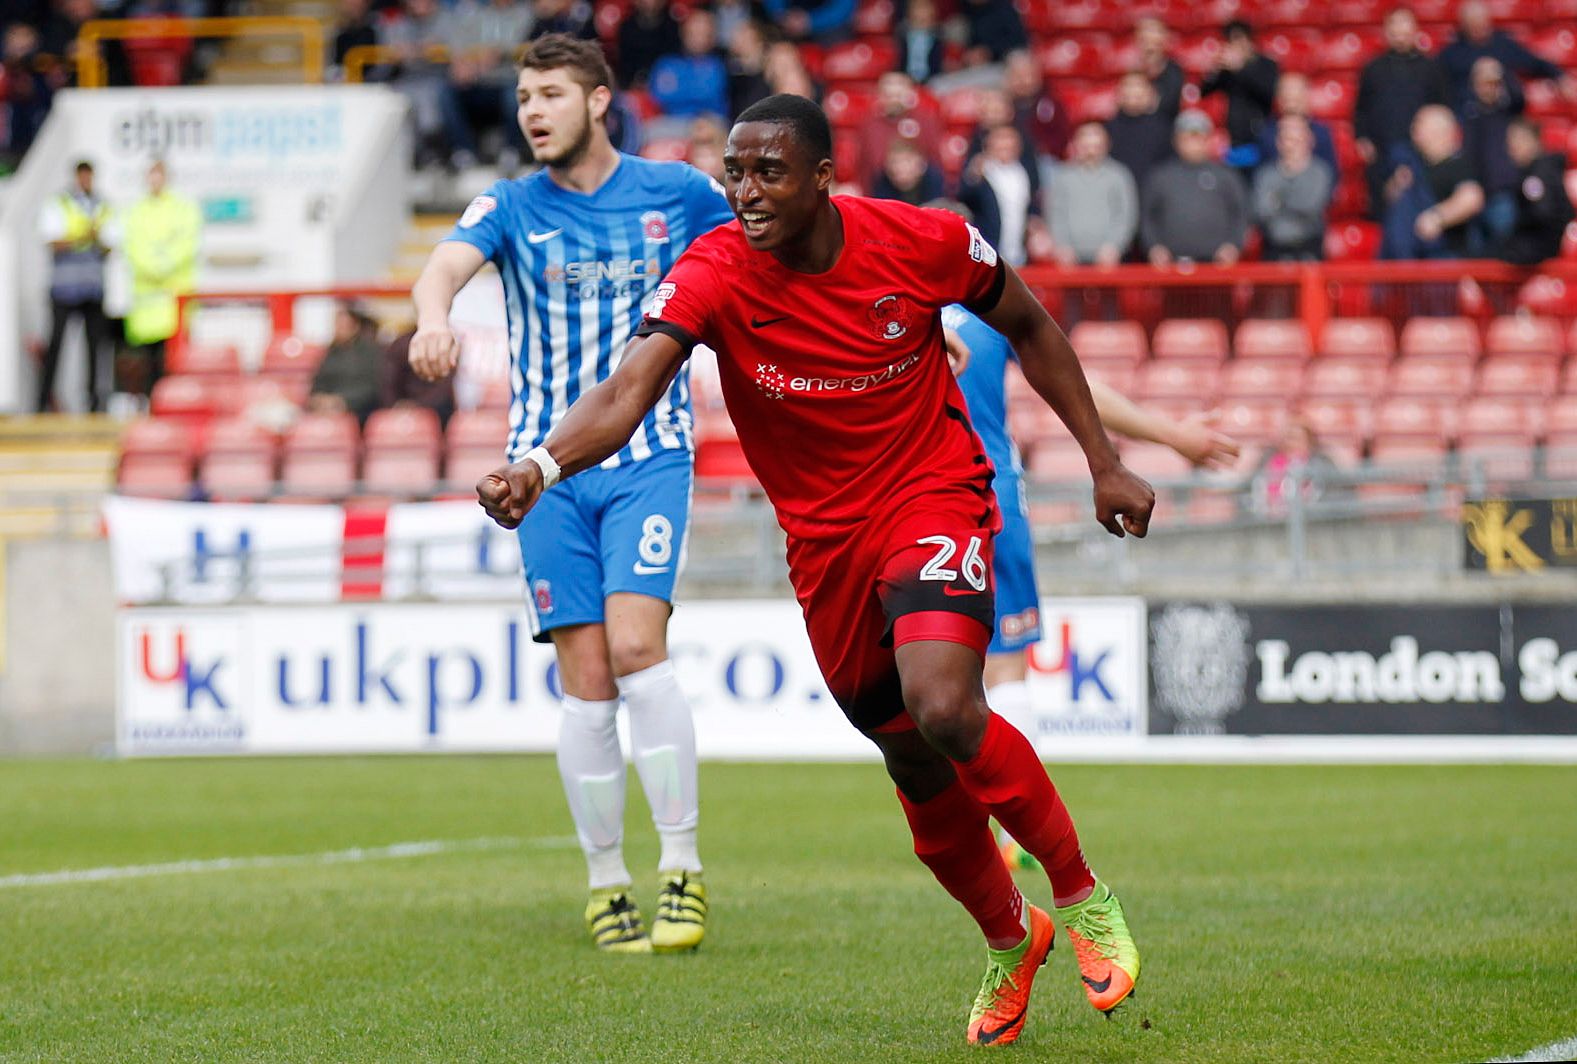 Britain Football Soccer - Leyton Orient v Hartlepool United - Sky Bet League Two - The Matchroom Stadium - 17/4/17 Leyton Orient's Victor Adeboyejo celebrates their first goal Mandatory Credit: Action Images / Tom Jacobs Livepic EDITORIAL USE ONLY. No use with unauthorized audio, video, data, fixture lists, club/league logos or 